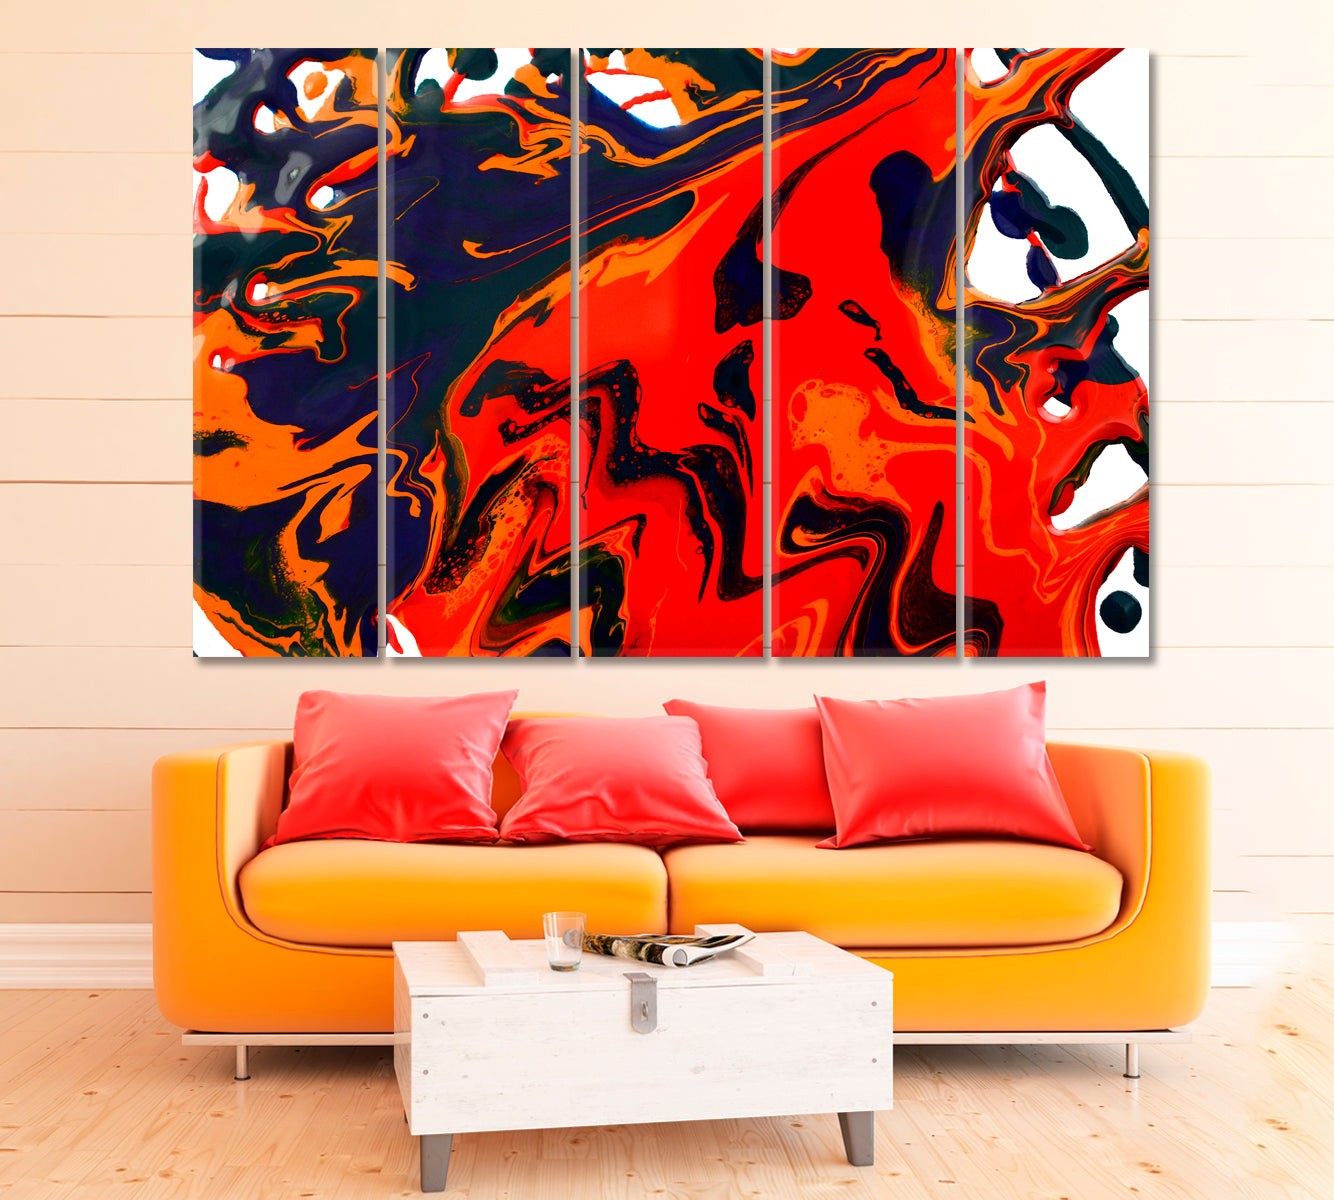 Abstract Acrylic Composition Canvas Print ArtLexy 5 Panels 36"x24" inches 